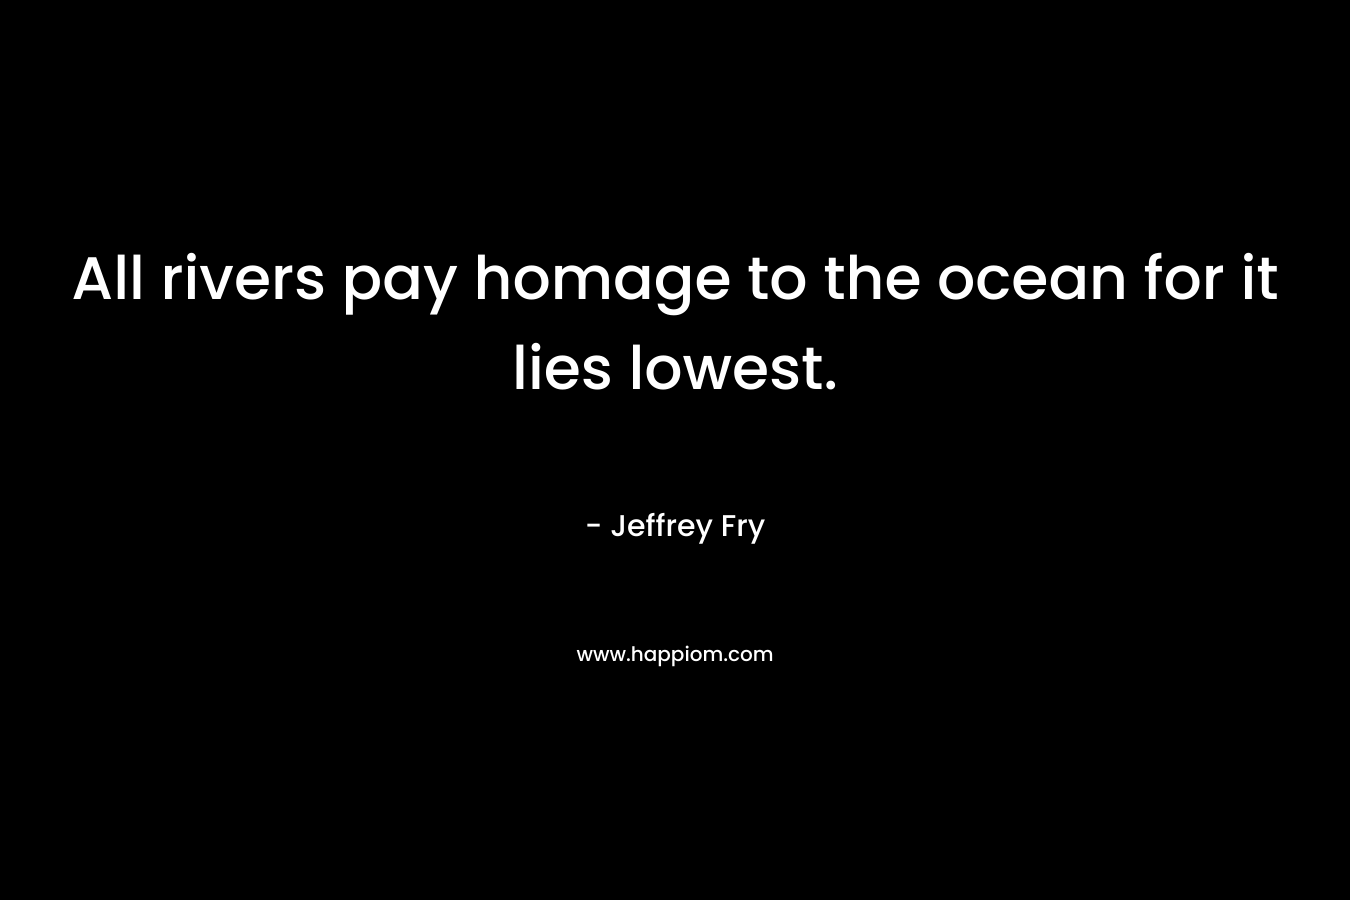 All rivers pay homage to the ocean for it lies lowest. – Jeffrey Fry